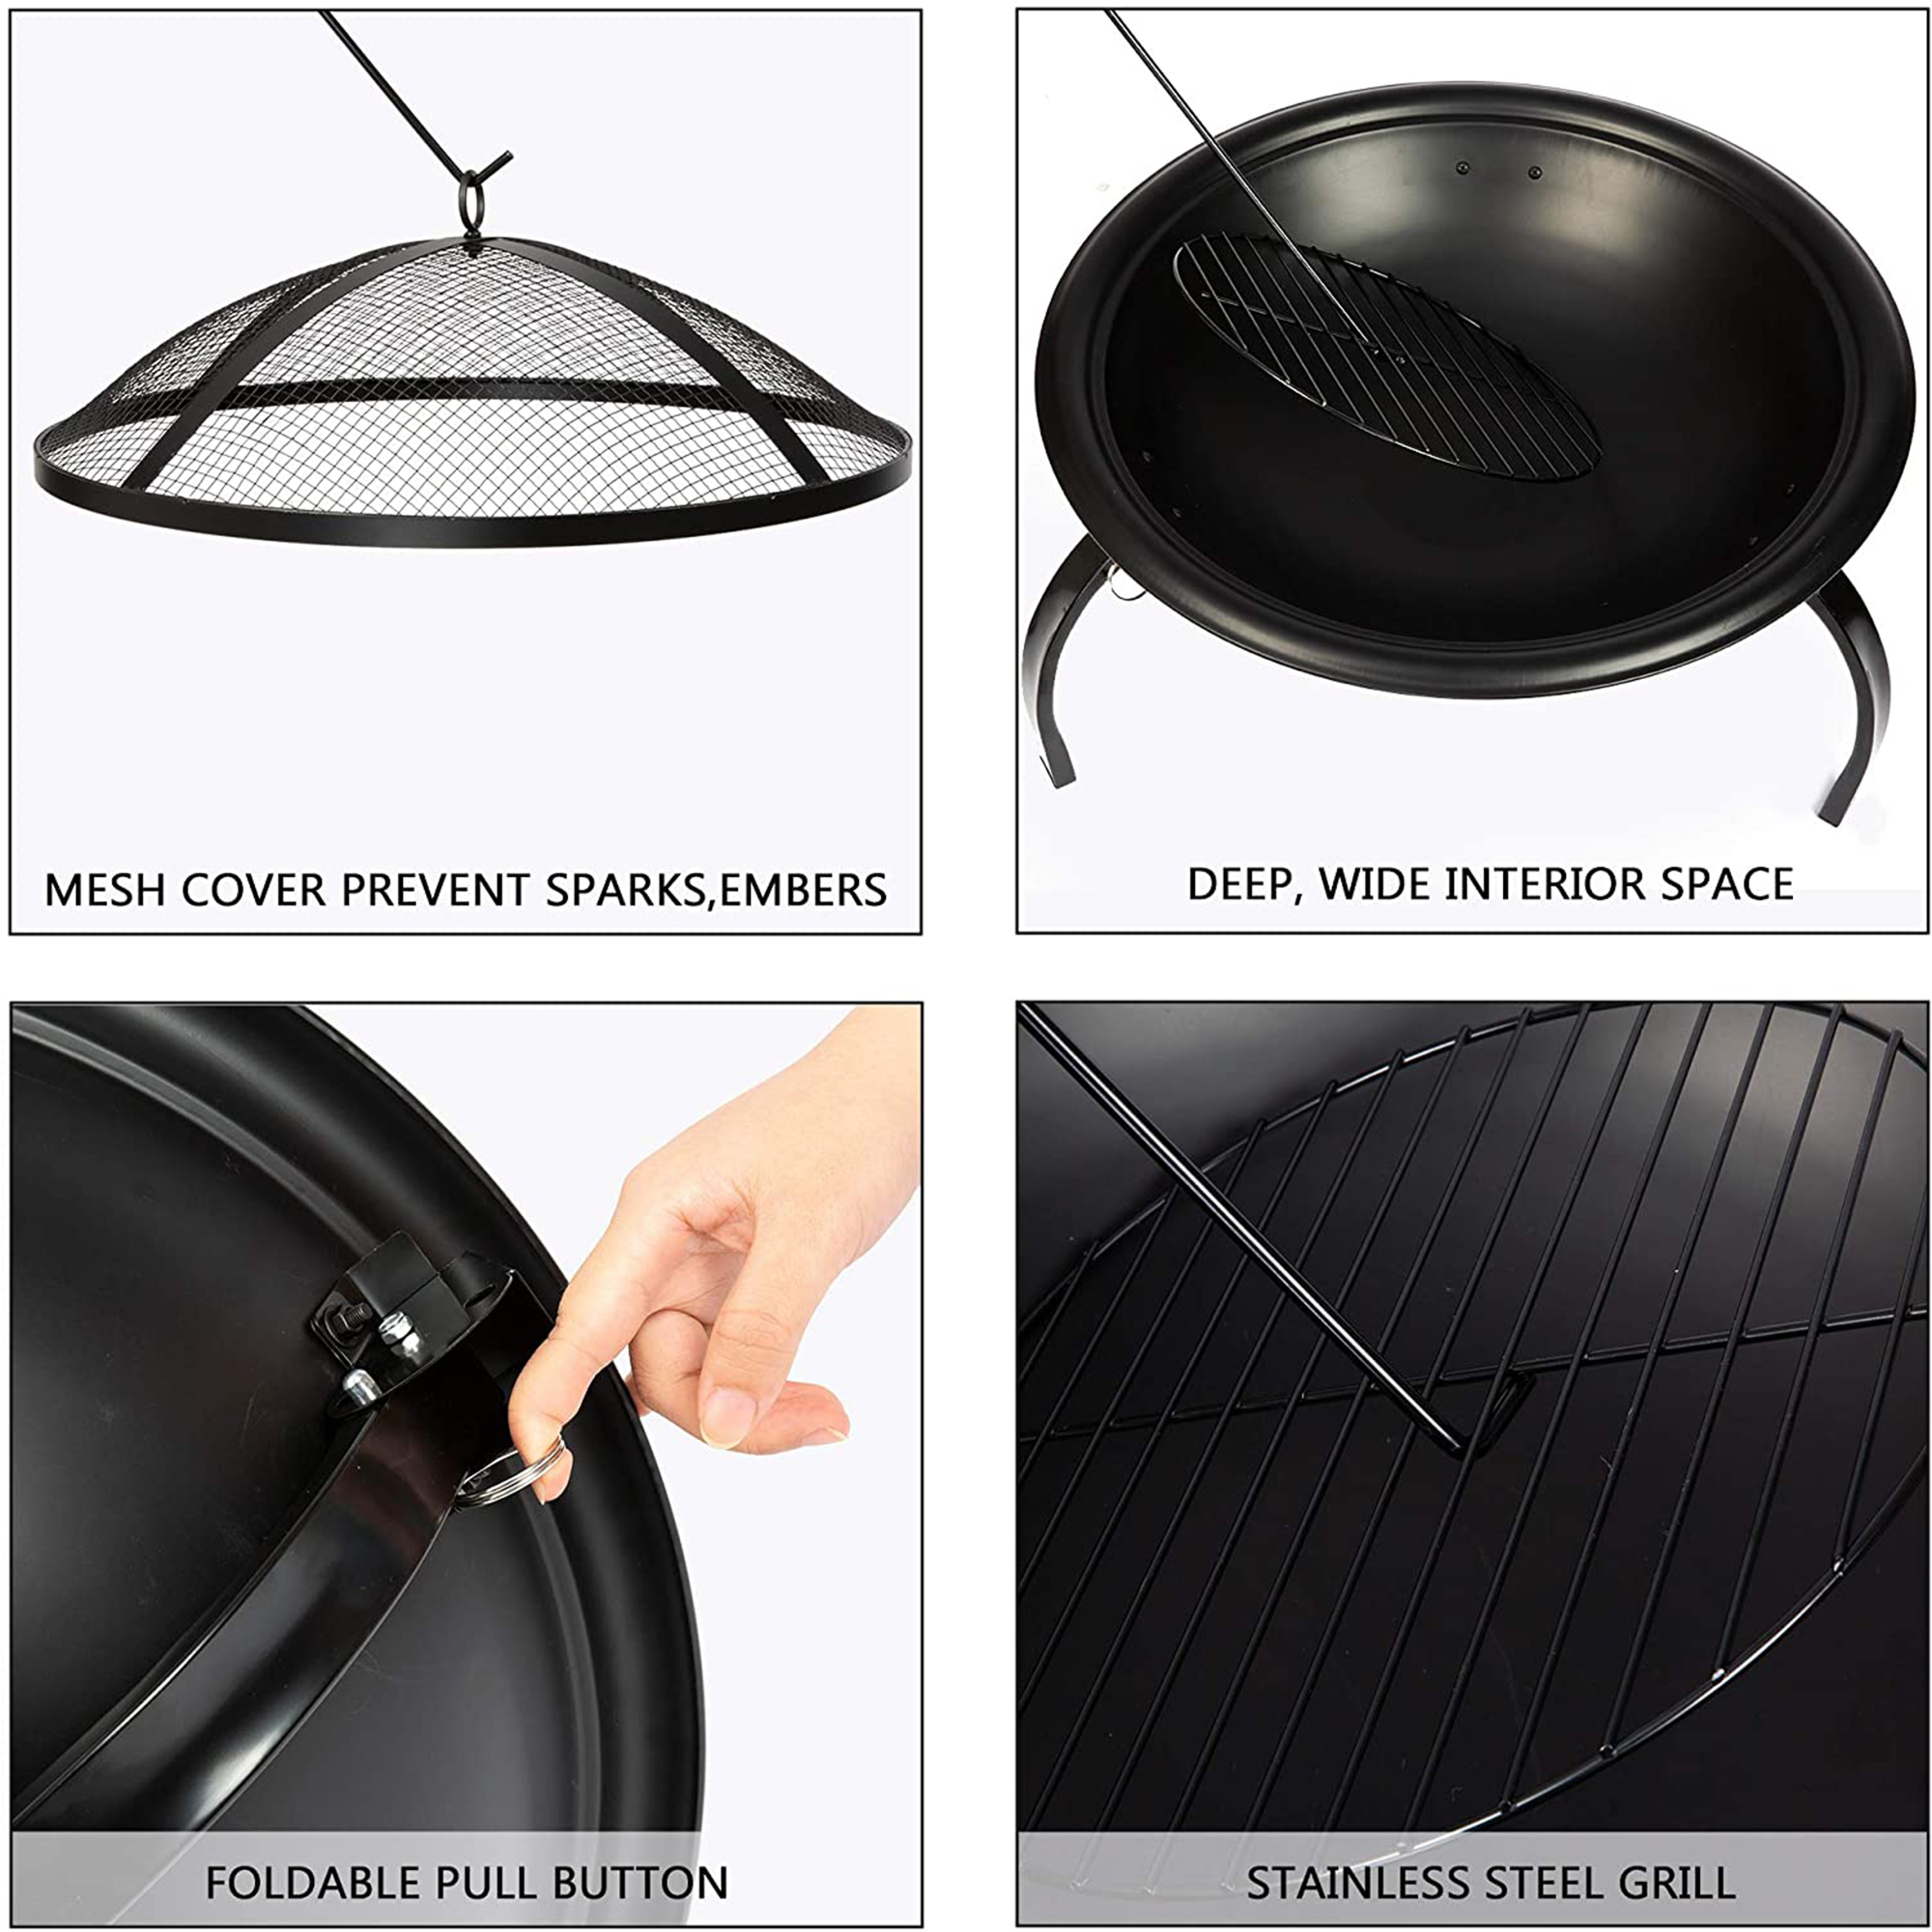 KARMAS PRODUCT 21'' Portable Fire Pit Outdoor Wood Burning BBQ Grill Firepit Bowl with Mesh Spark Screen Cover Fire Poker for Backyard Garden Camping Picnic Beach Park - image 5 of 7